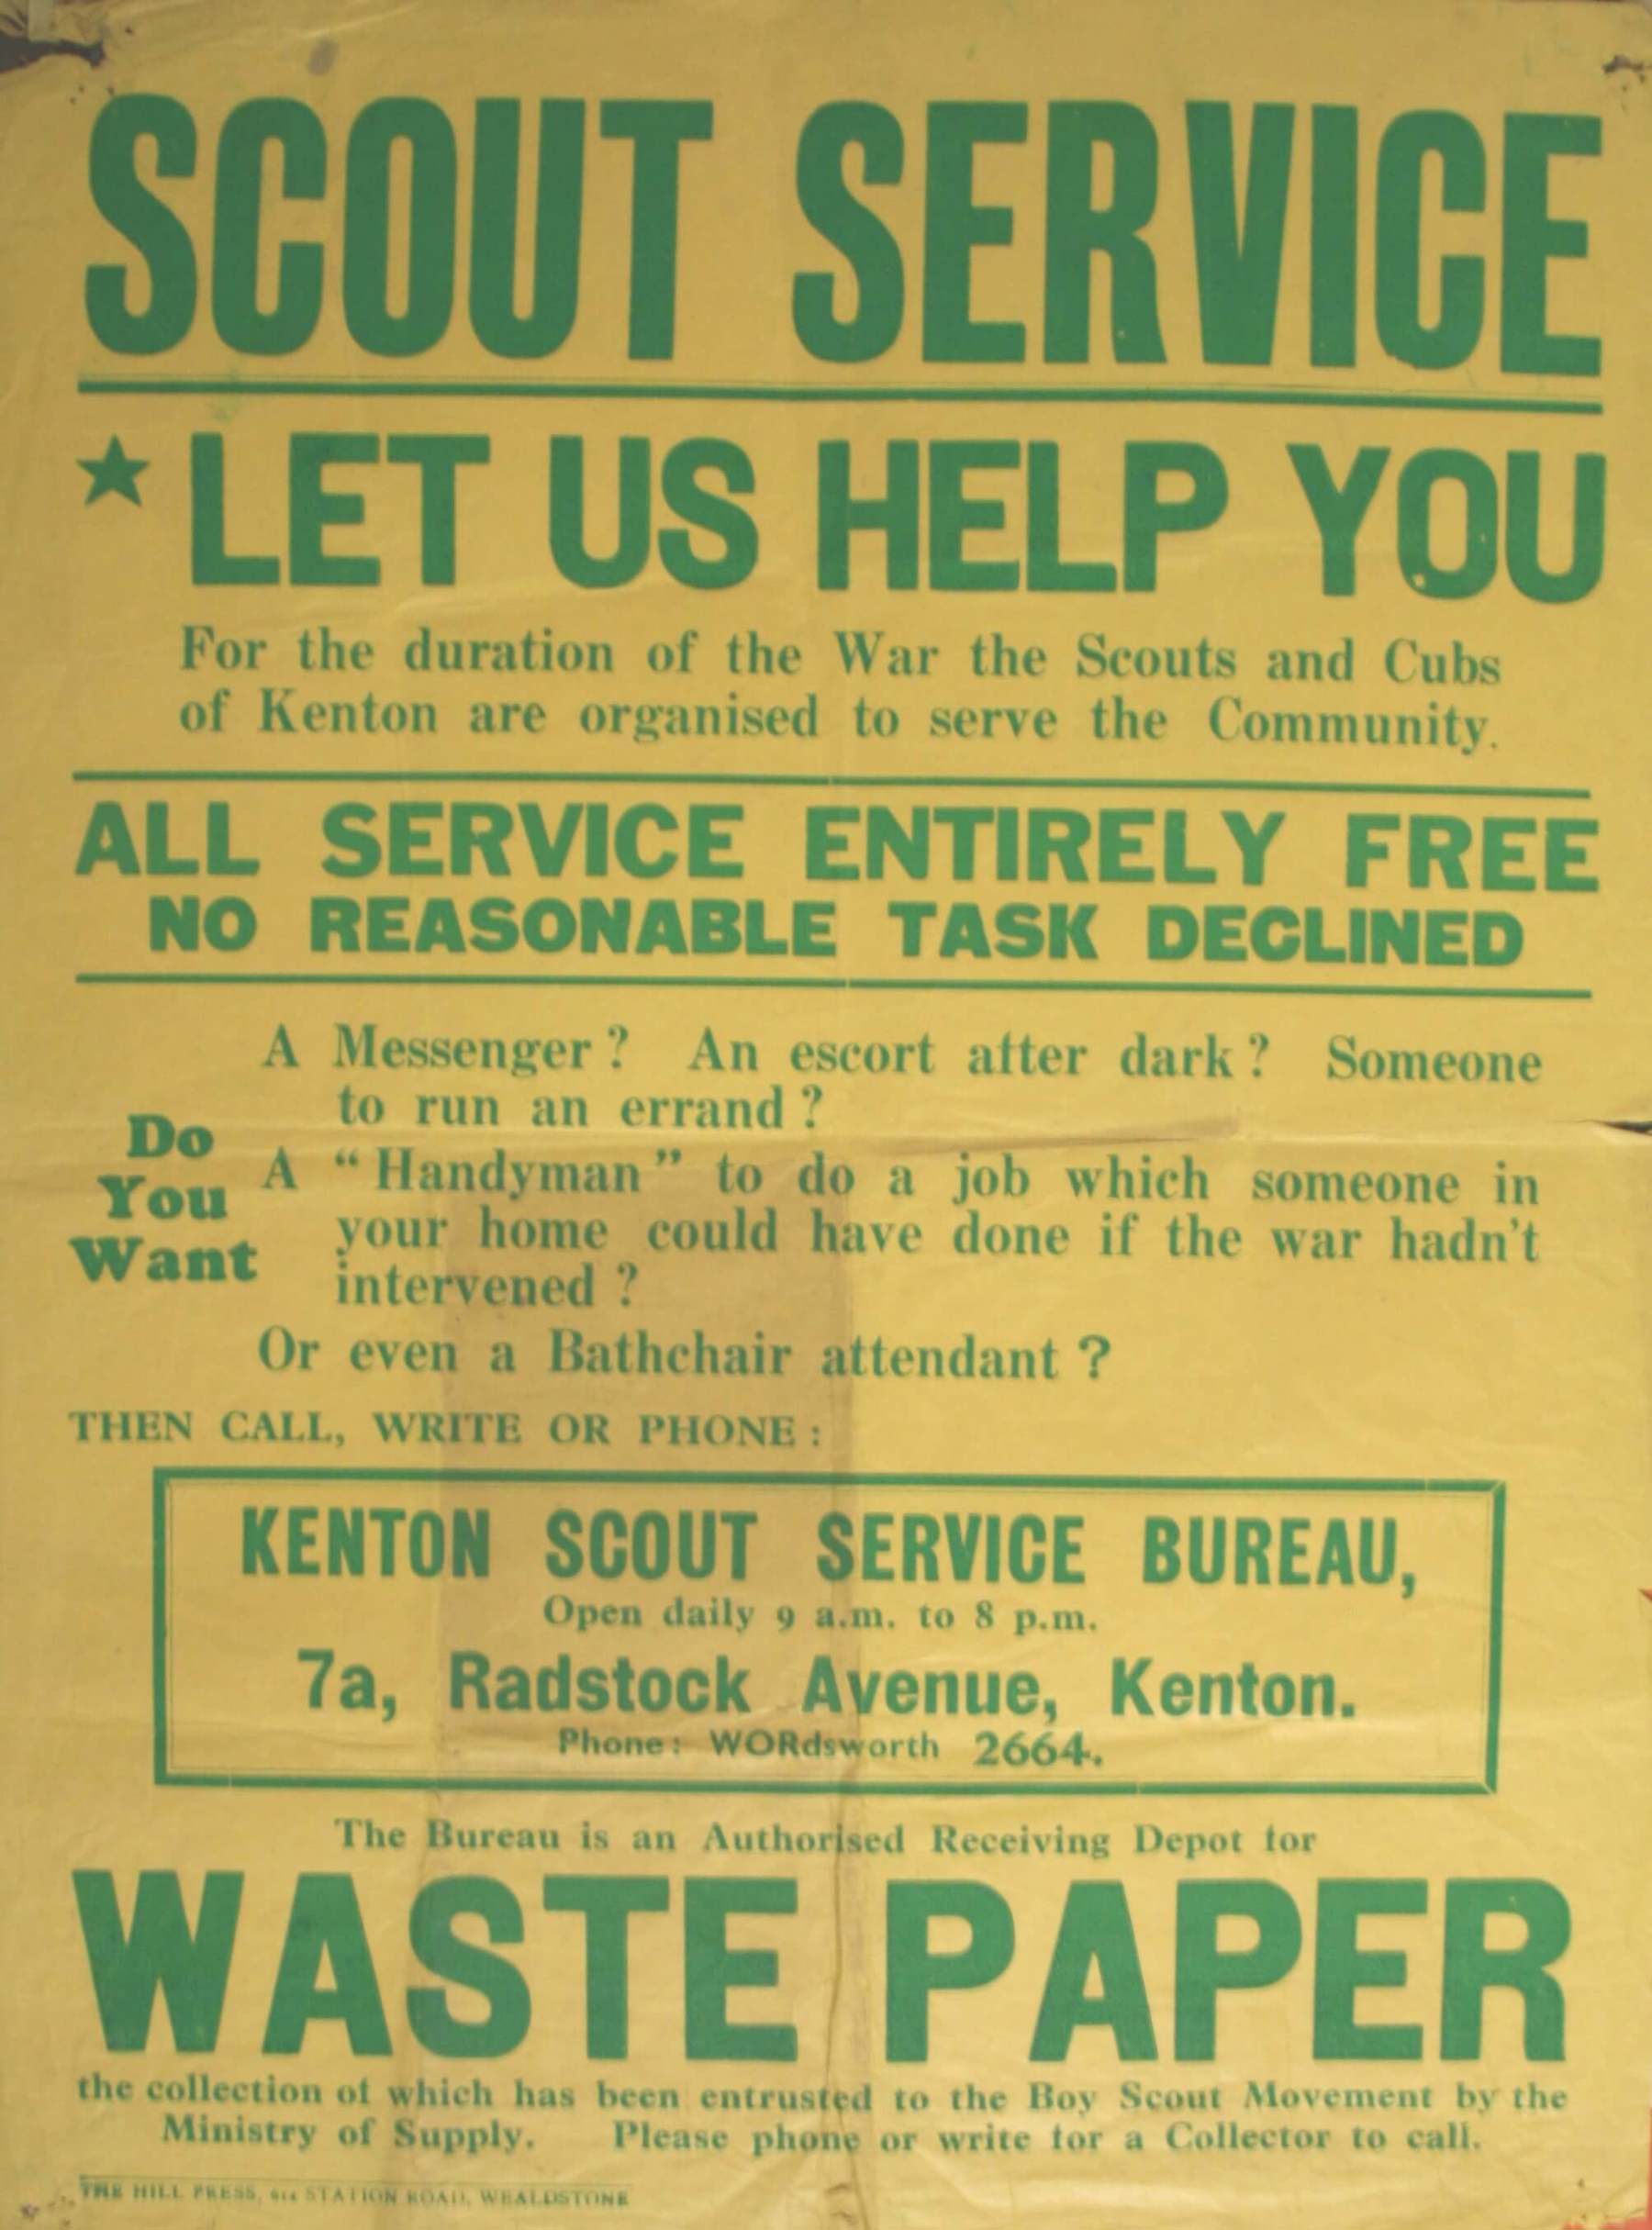 Poster for the Scout Service, with a yellow background and green writing